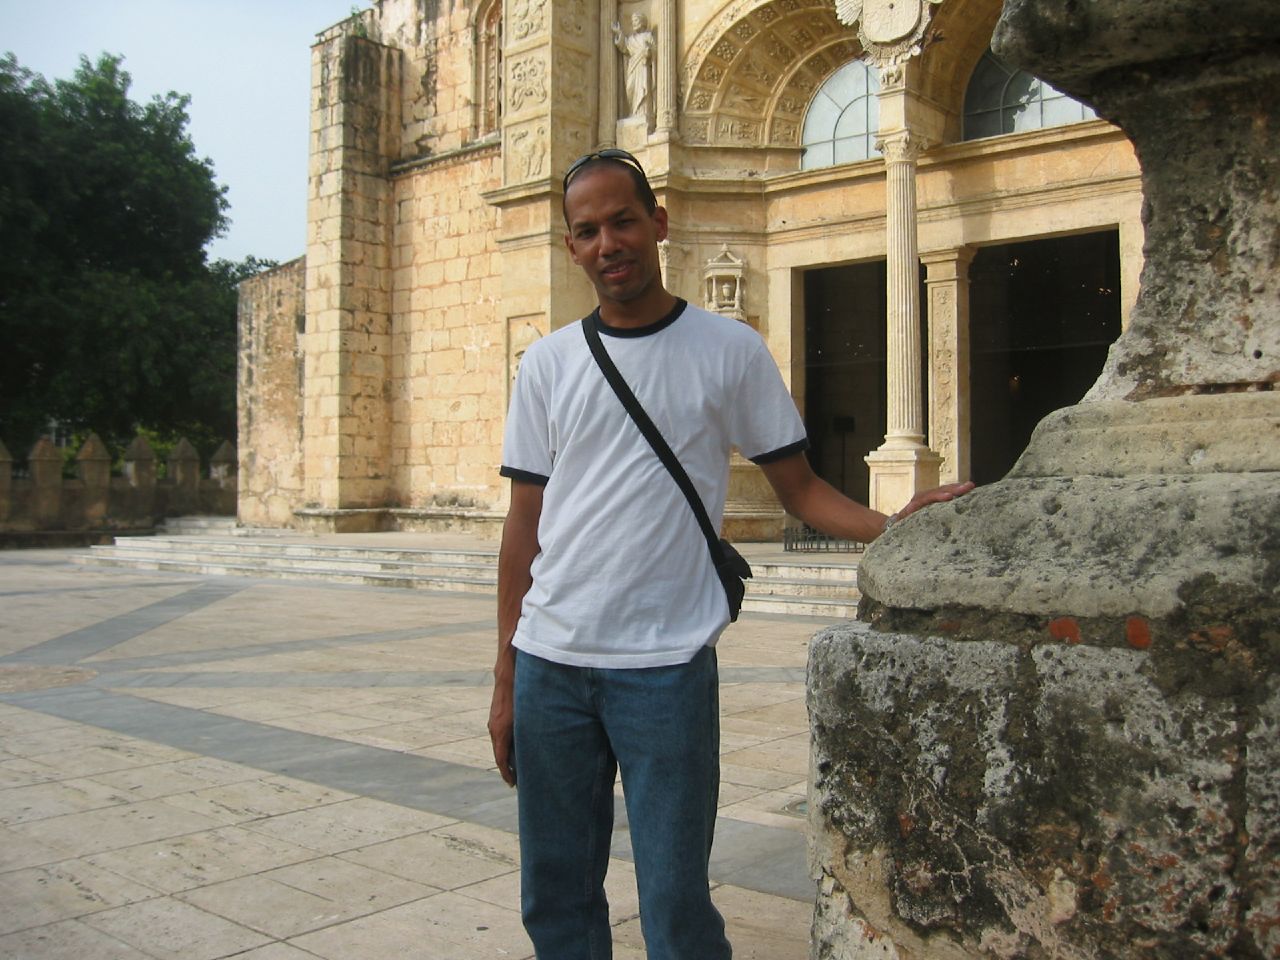 man standing in front of old, historical building posing for the camera